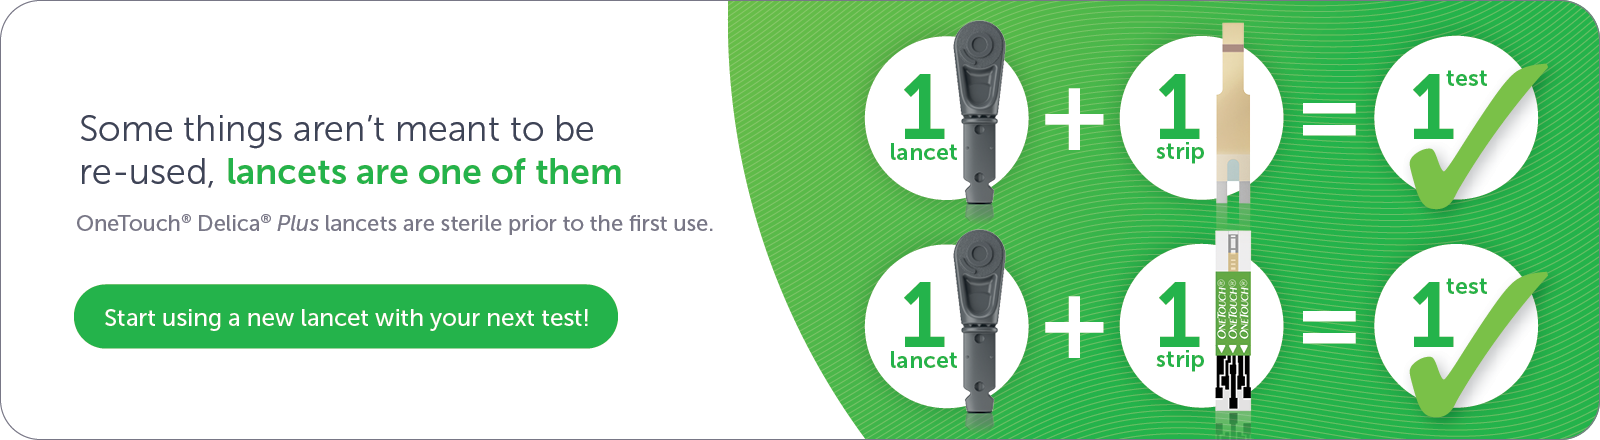 Start using a new lancet with your next test!